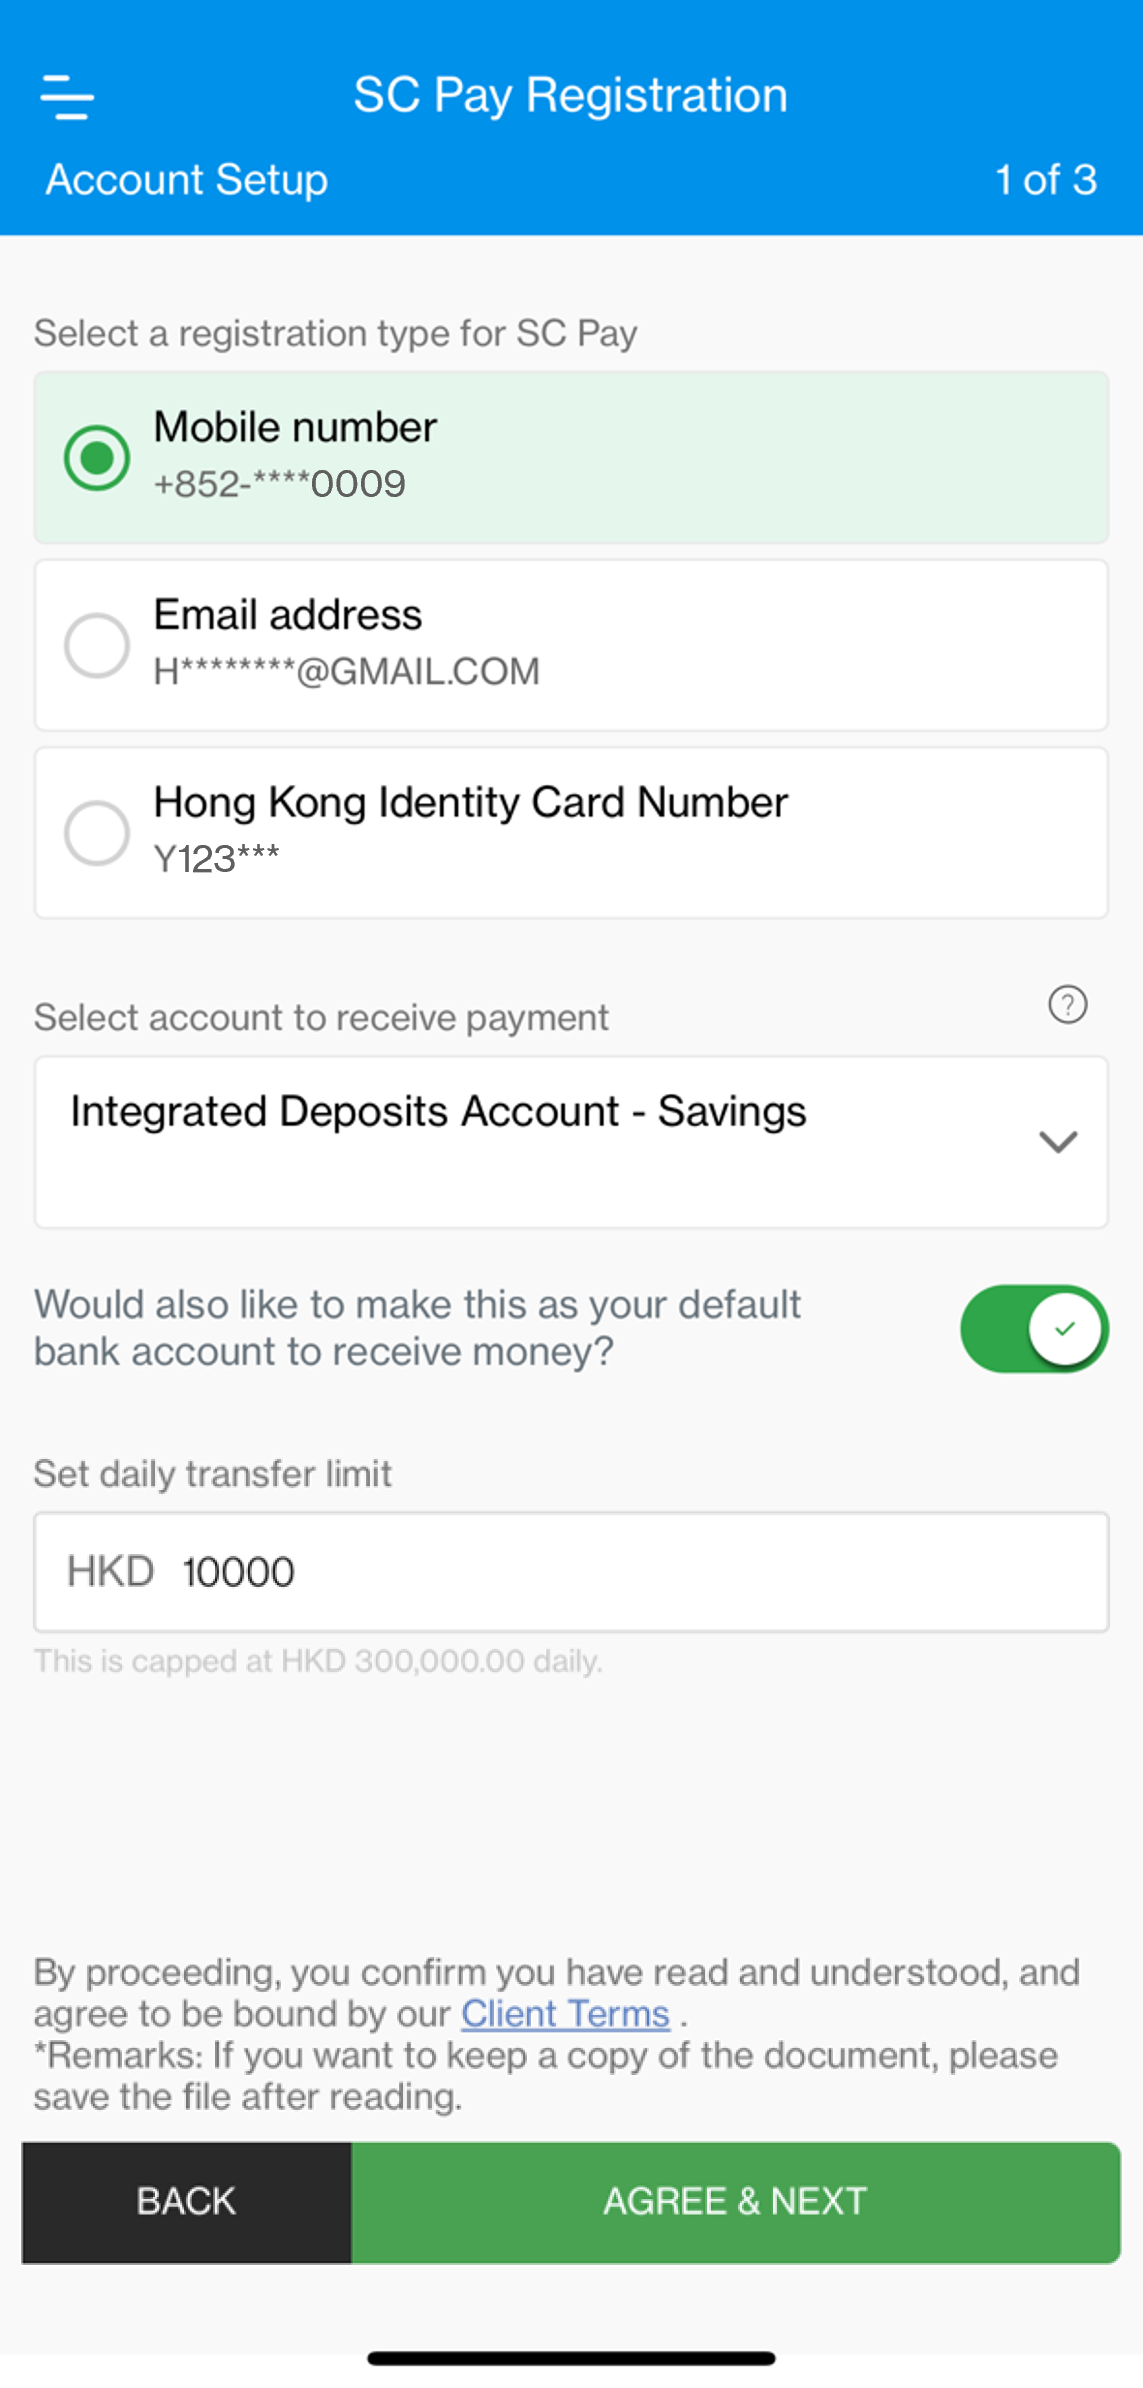 Select mobile number or email address to register with, then source account to send money from. Set the account as default to receive money via FPS. You can also change the pre-set daily transfer limit (maximum HK$300,000).